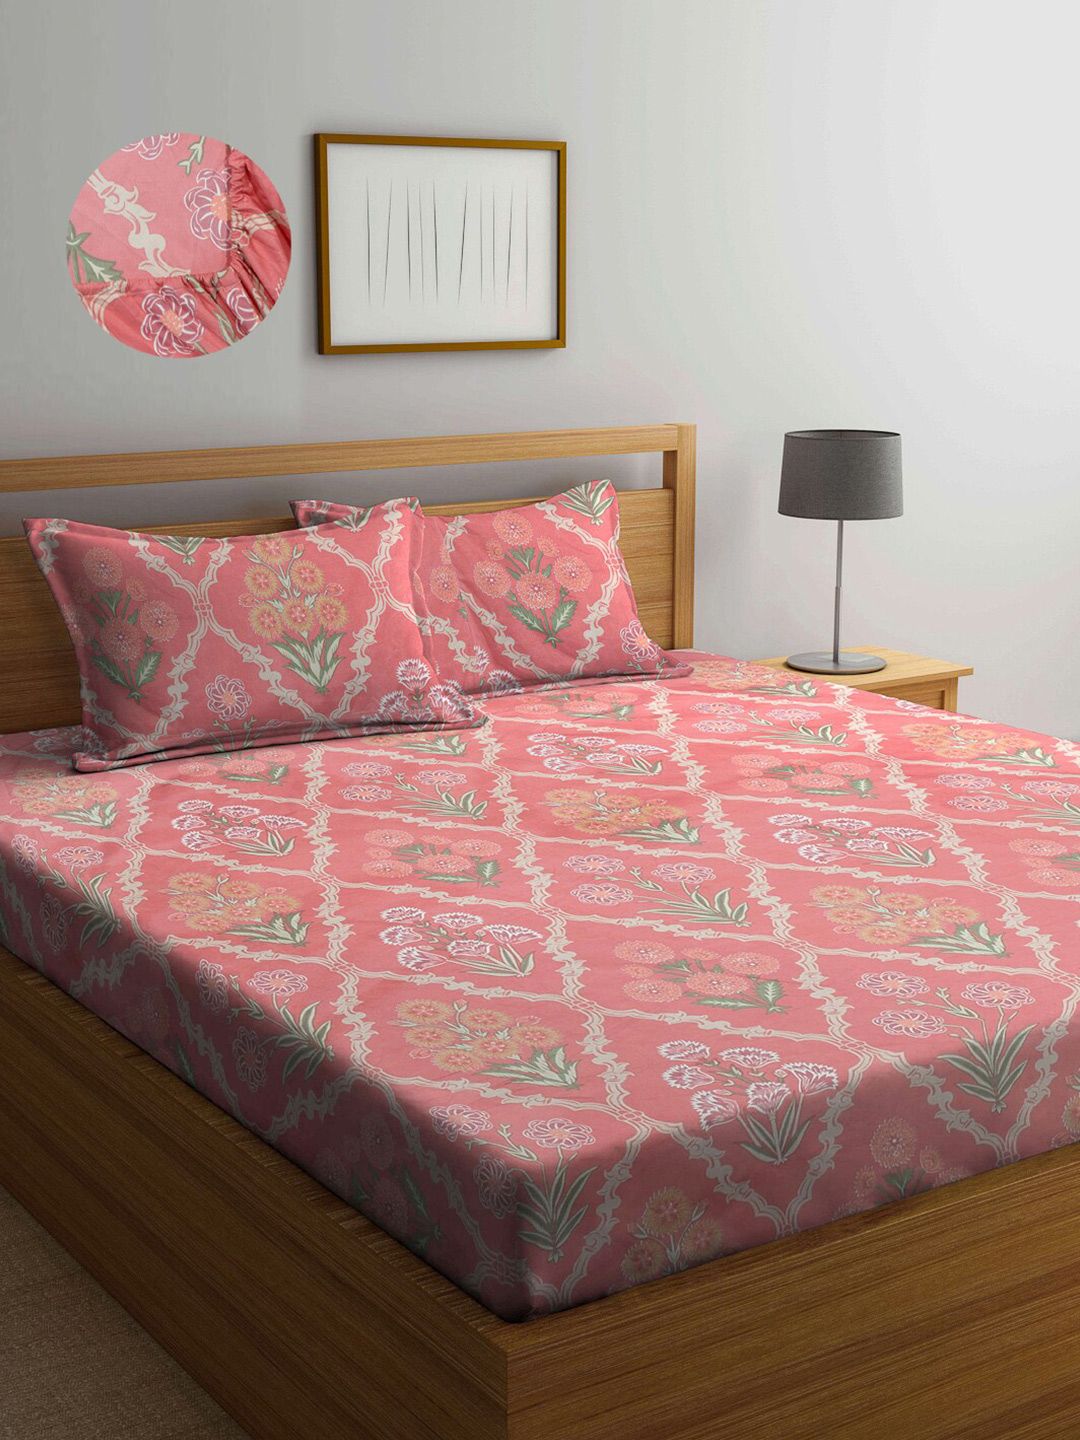 Arrabi Peach-Coloured & Cream-Coloured Floral 300 TC King Bedsheet with 2 Pillow Covers Price in India